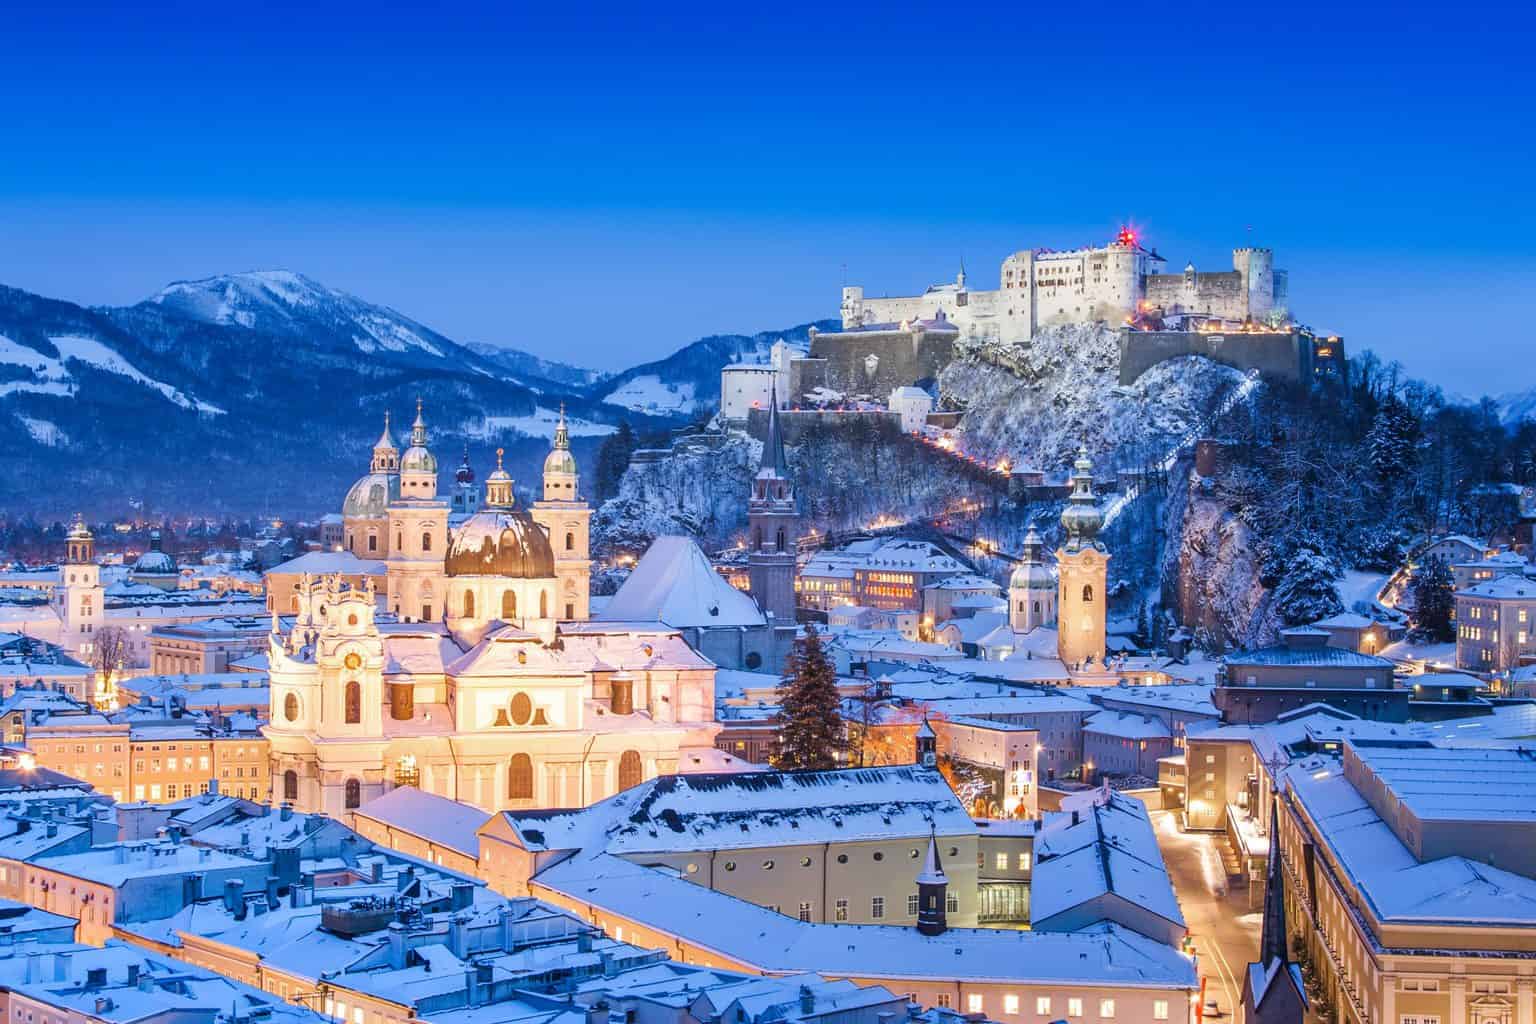 The historic city of Salzburg, Austria under a beautiful blanket of snow. You can easily see why it is one of the best European Christmas destinations. 